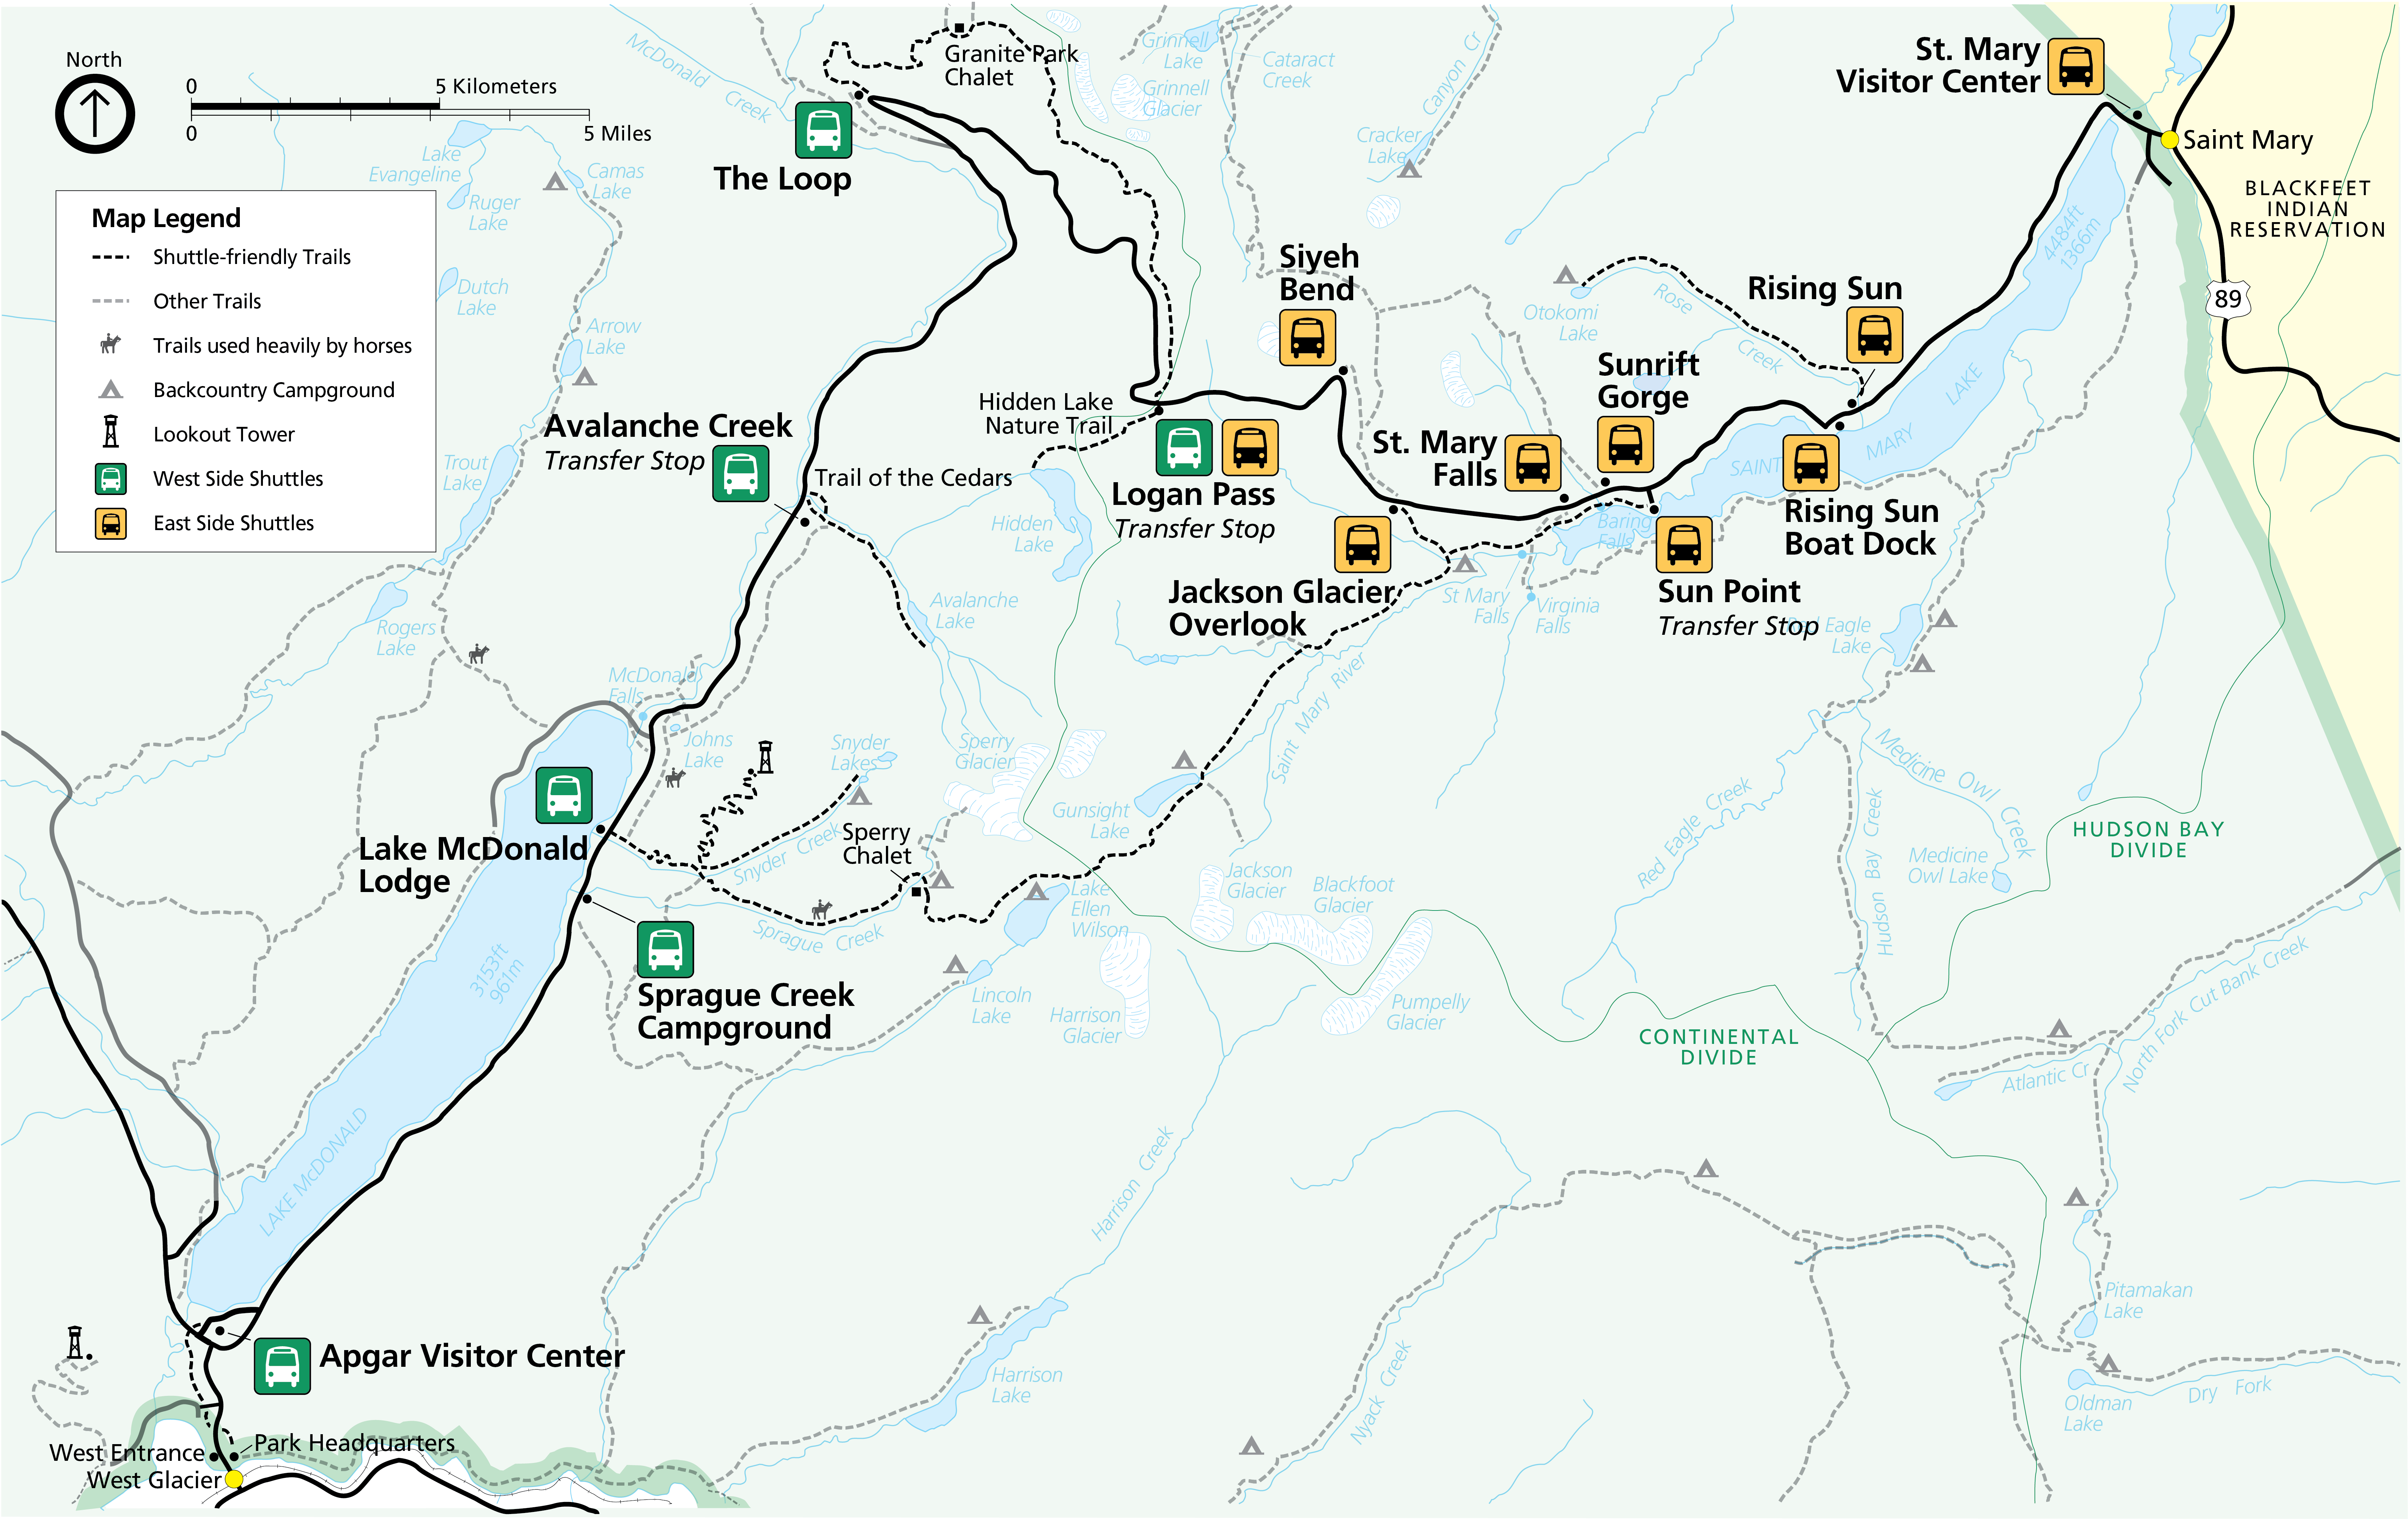 Map shows shuttle stops along the Going-to-the-Sun Road. Shuttle stops on the west side are shown in green. Shuttle stops for the east side are shown in yellow.